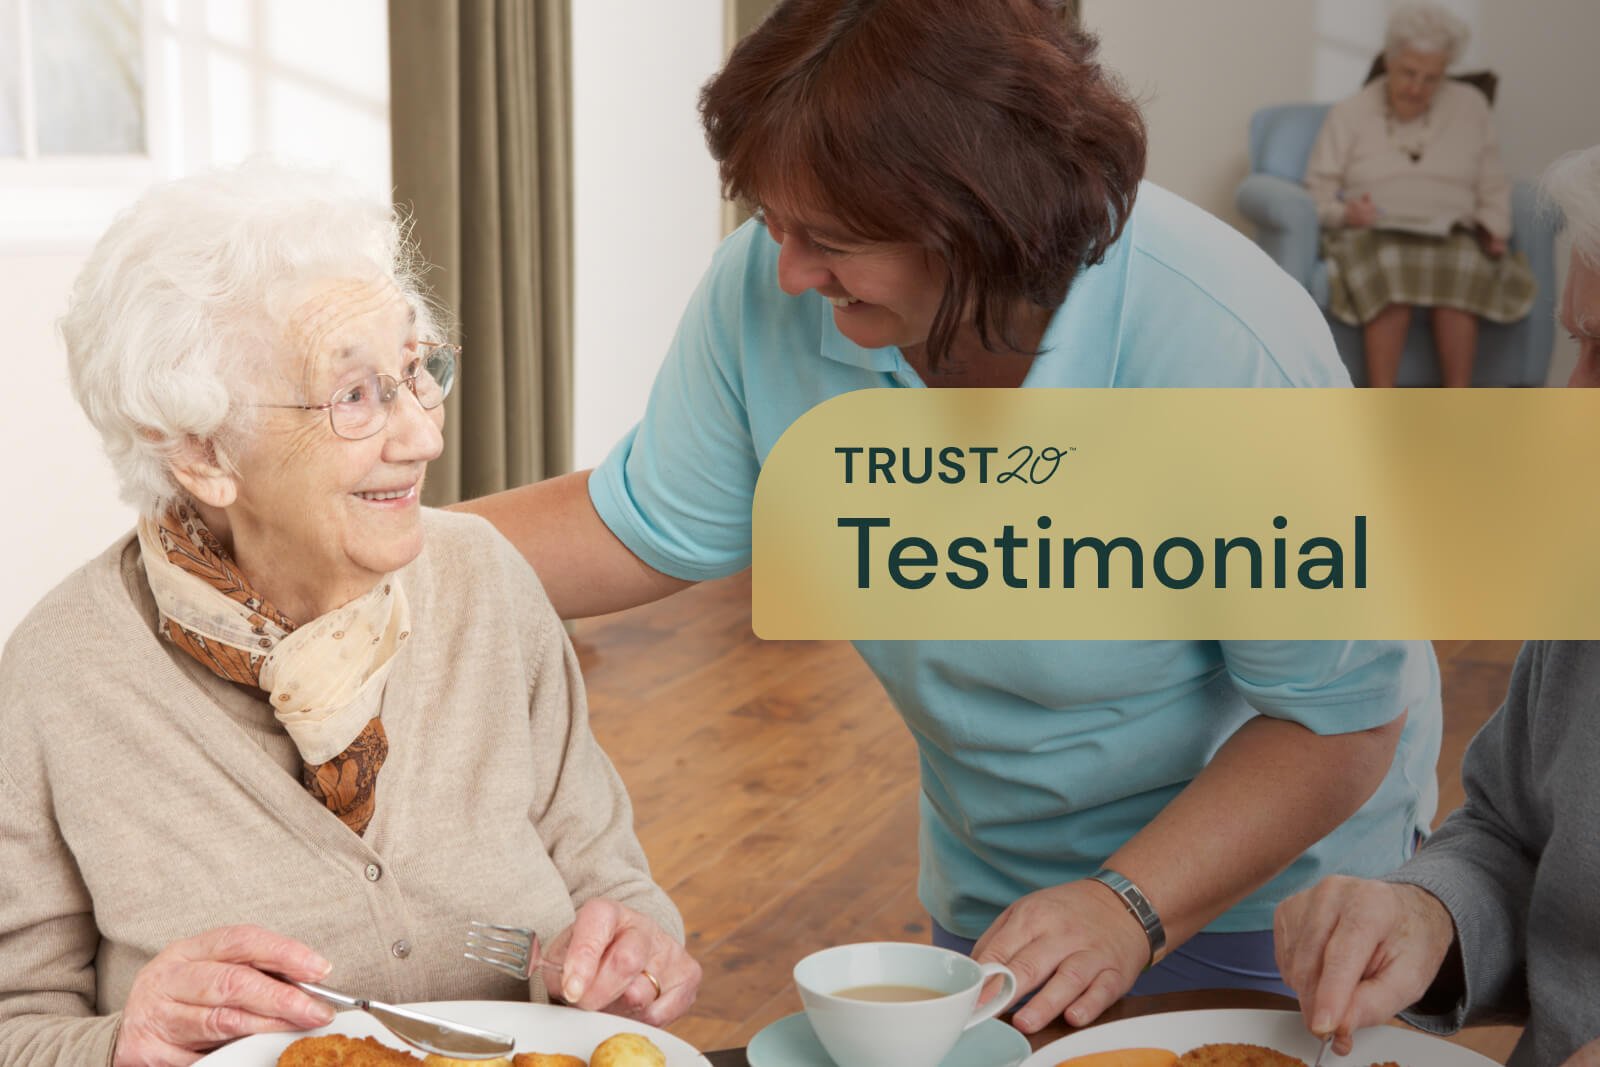 Trust20 Testimonial from Maggie Rowlands